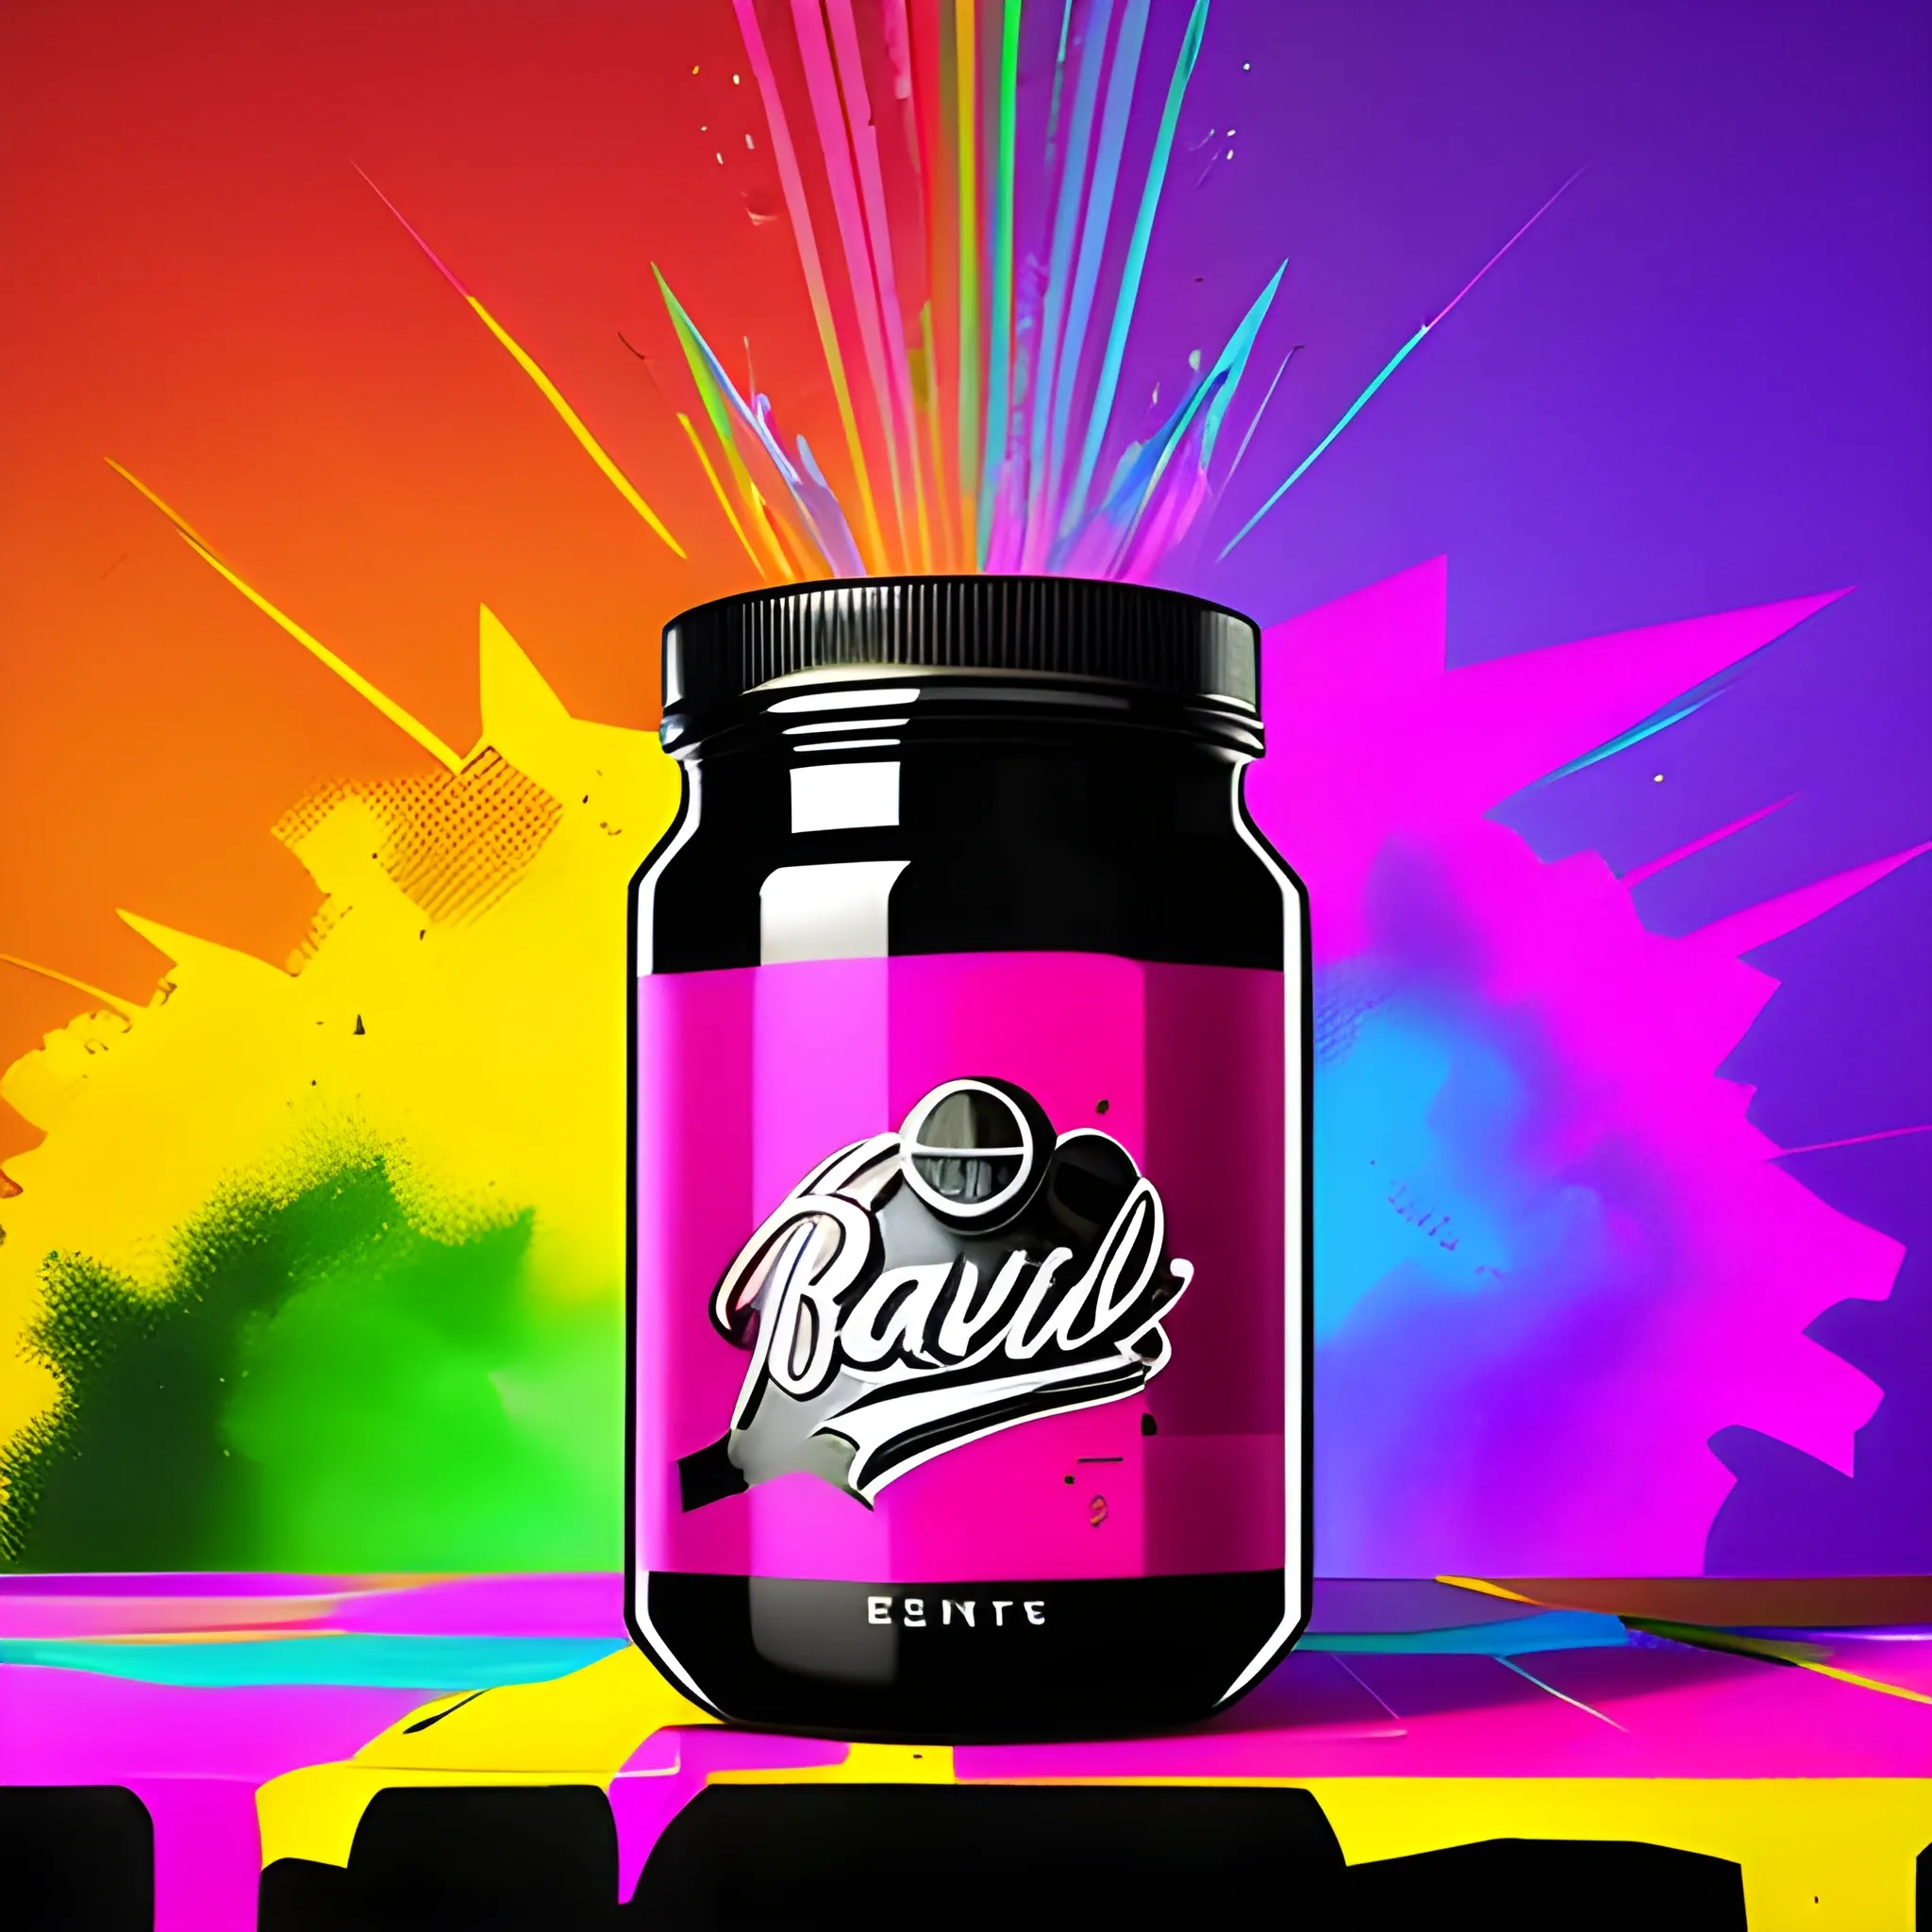 Create a vibrant and edgy label design for 'Rainbow Razz' jar, targeting a youthful, urban audience. Incorporate elements that reflect a dynamic cityscape, graffiti-inspired artwork, and a sense of nightlife energy. Utilize bold, modern fonts and vivid color schemes to evoke a sense of excitement and style. Emphasize the rebellious and adventurous spirit of the brand, while maintaining a clean and eye-catching layout. Remember to incorporate the 'GEMZ' logo prominently. Get creative with the composition to make it stand out on the shelf and appeal to the young, trendsetting demographic